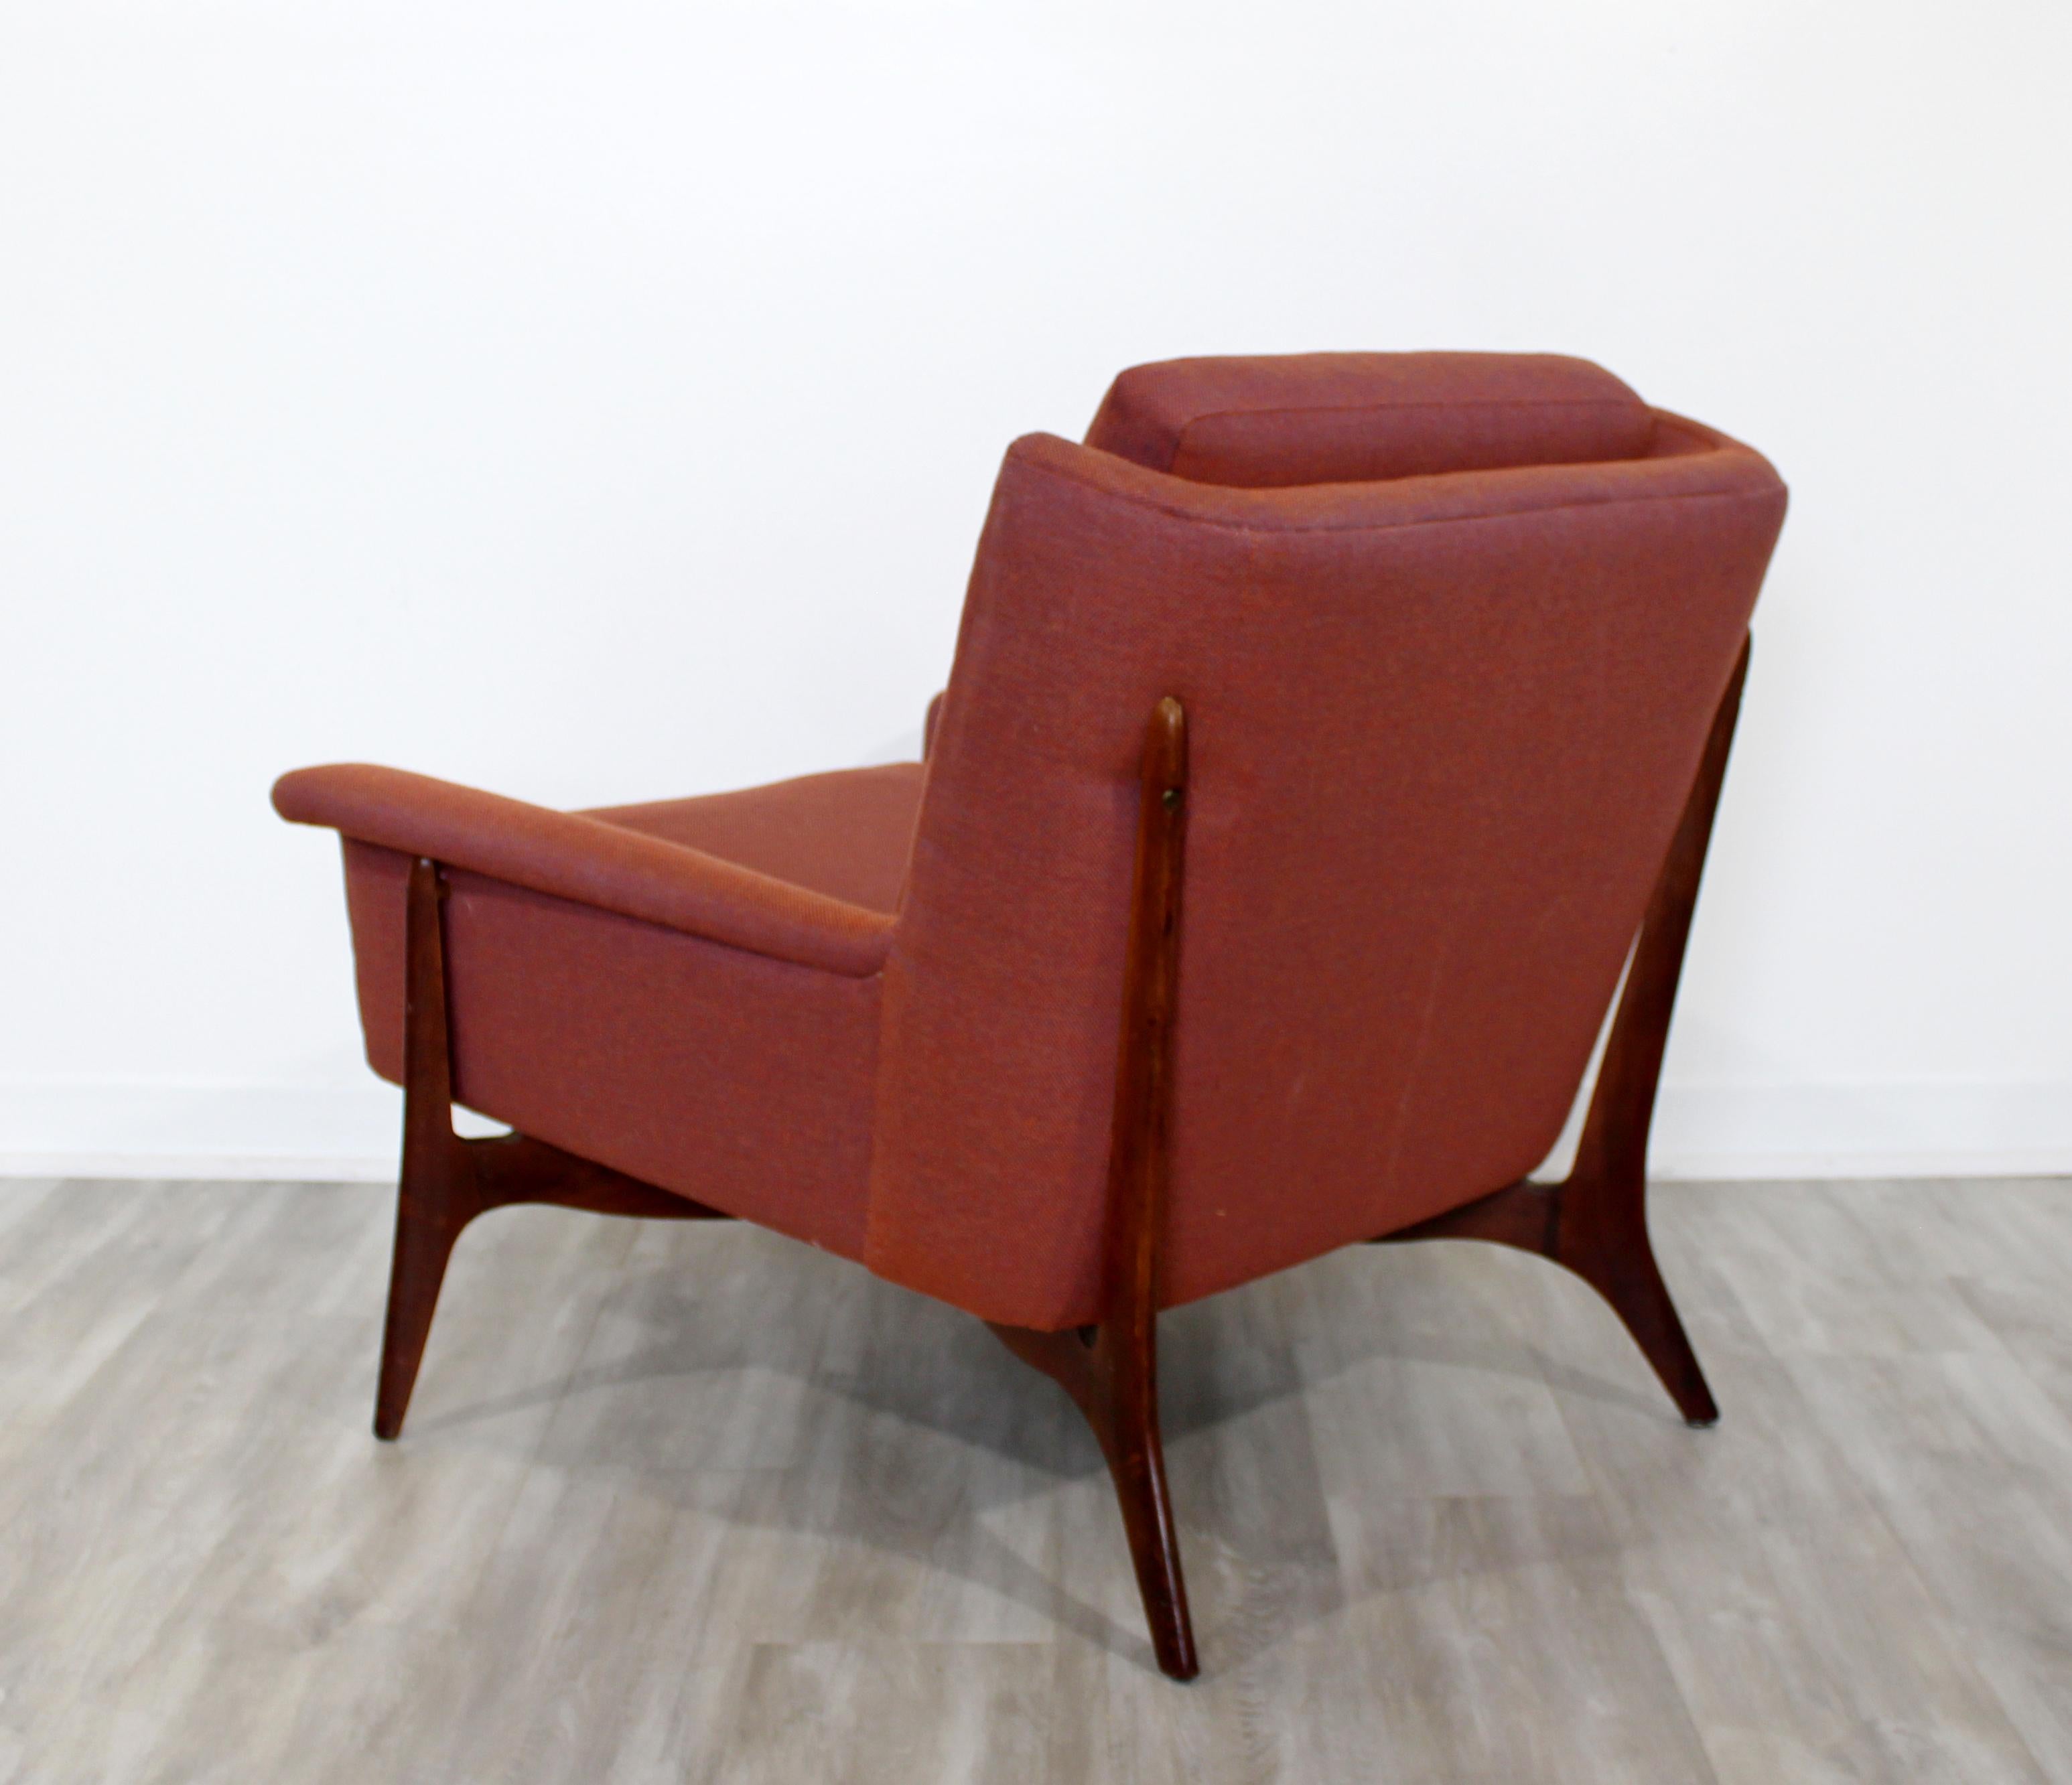 Upholstery Mid-Century Modern Early Sculptural Wood Lounge Armchair, 1950s